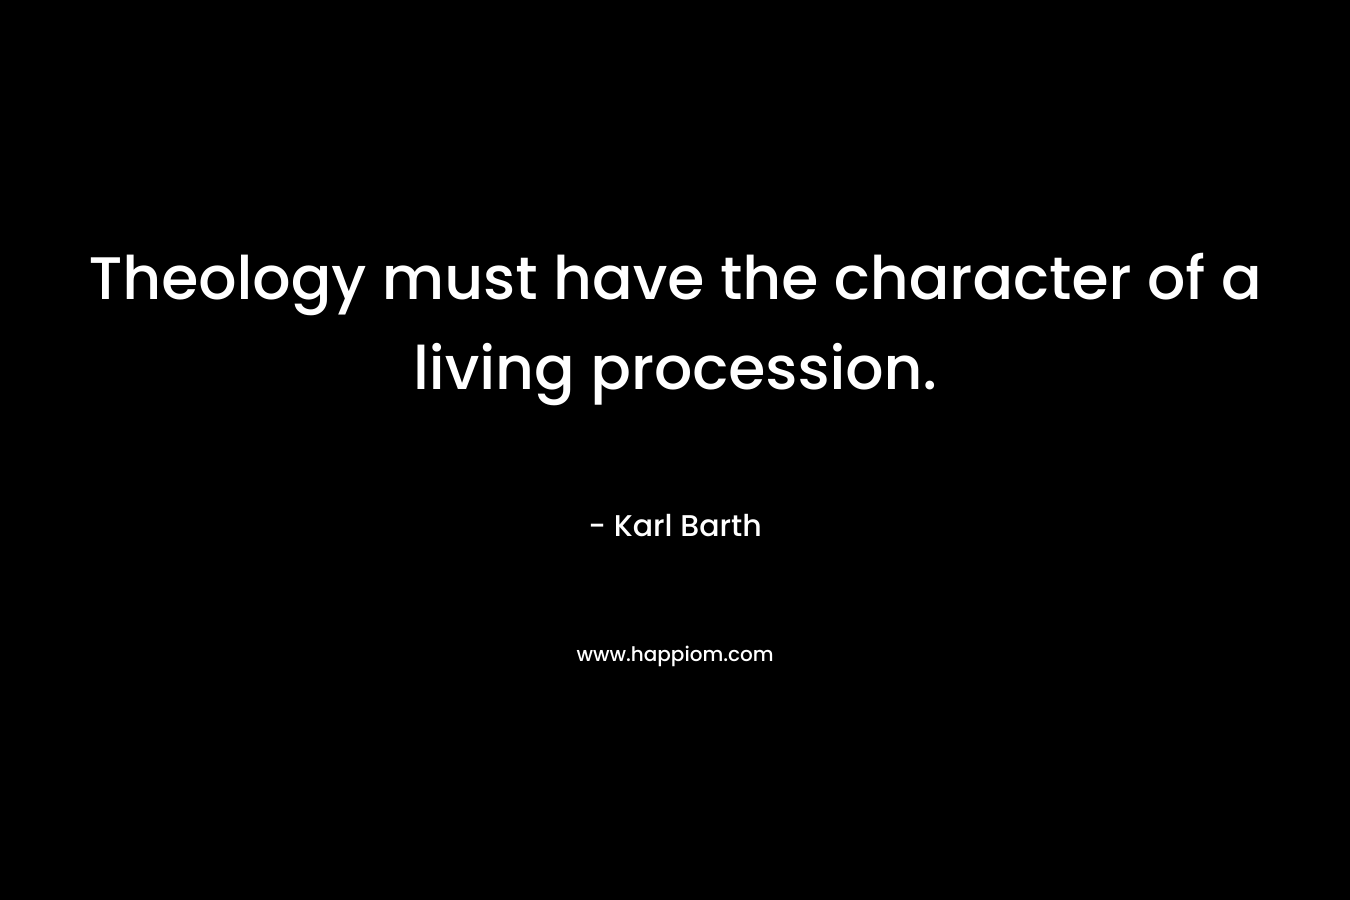 Theology must have the character of a living procession. – Karl Barth